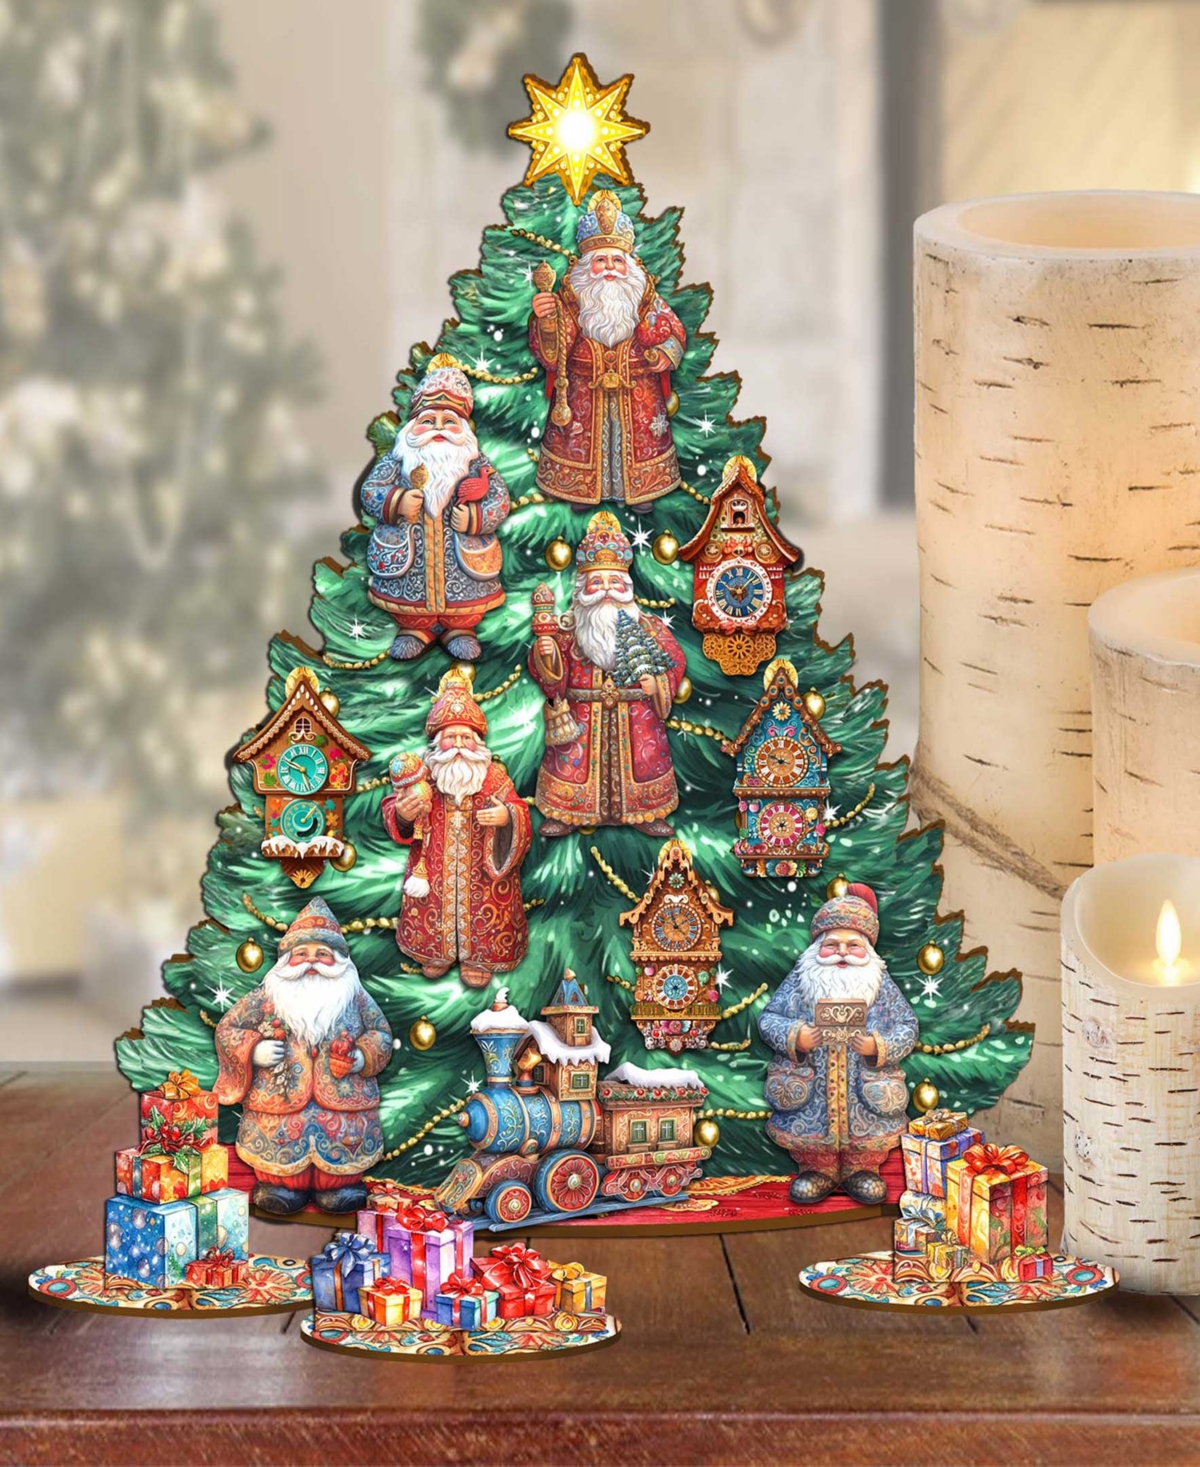 Designocracy Santa Christmas Arrival Themed Wooden Christmas Tree With Ornaments Set Of 13 G. Debrekht In Multi Color